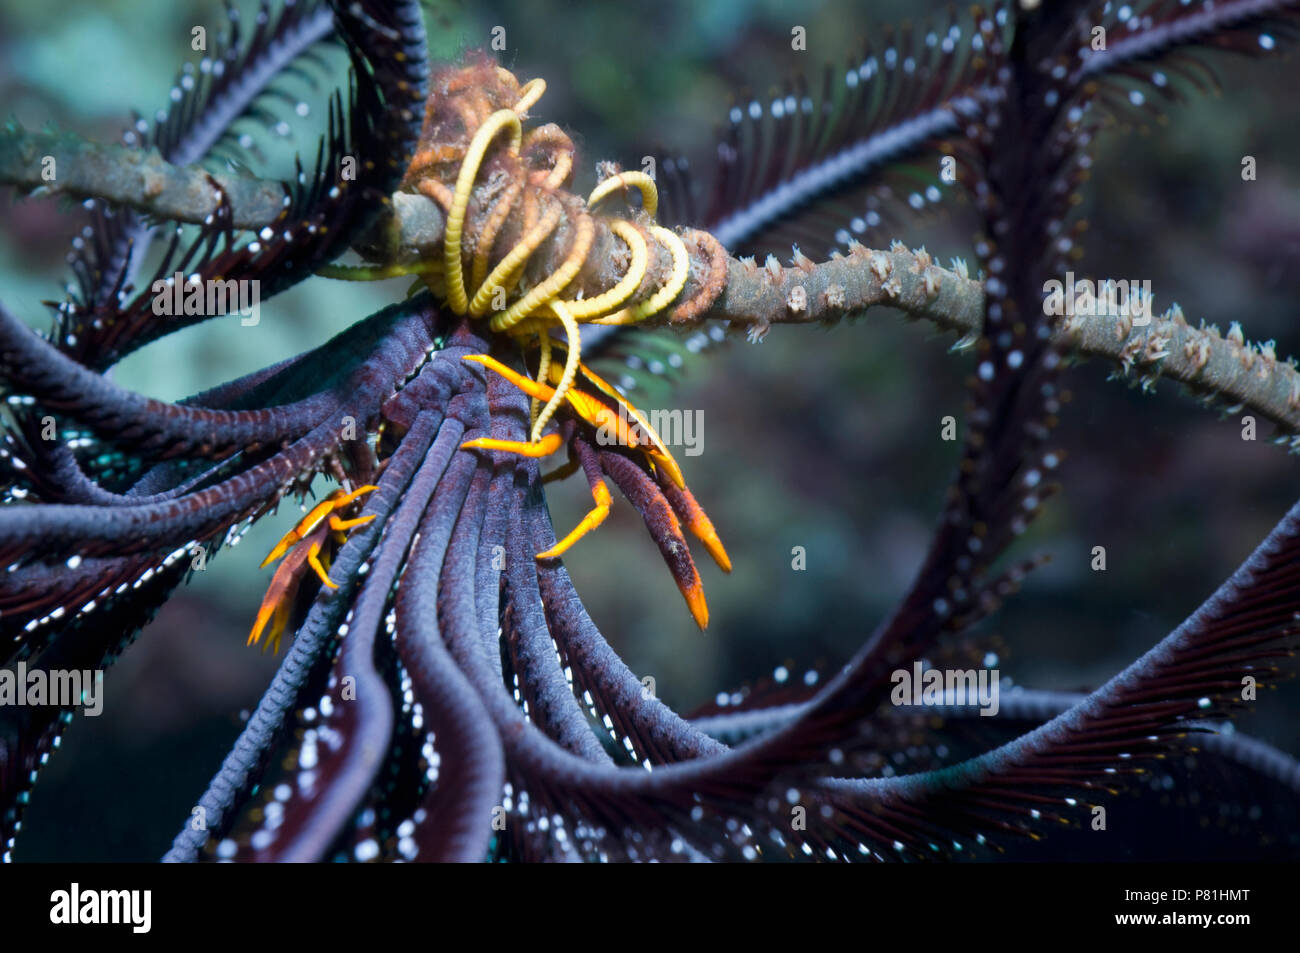 Pair of Squat lobster (Allogalathea elegans) on featherstar.  The female of the species is larger.  Solomon Islands. Stock Photo